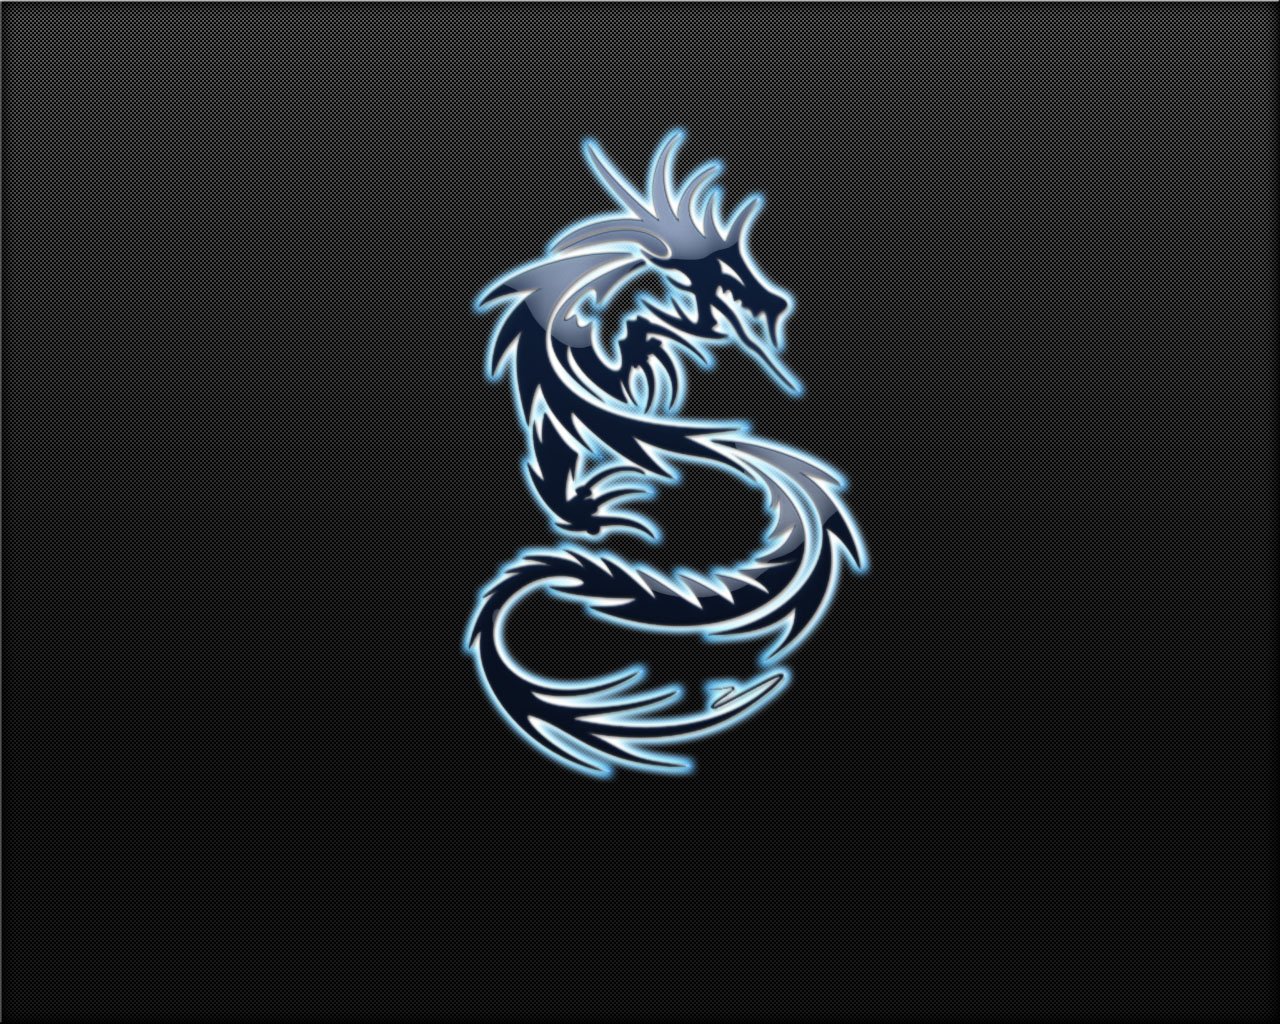 Blue Fire Dragon by Gerguter on